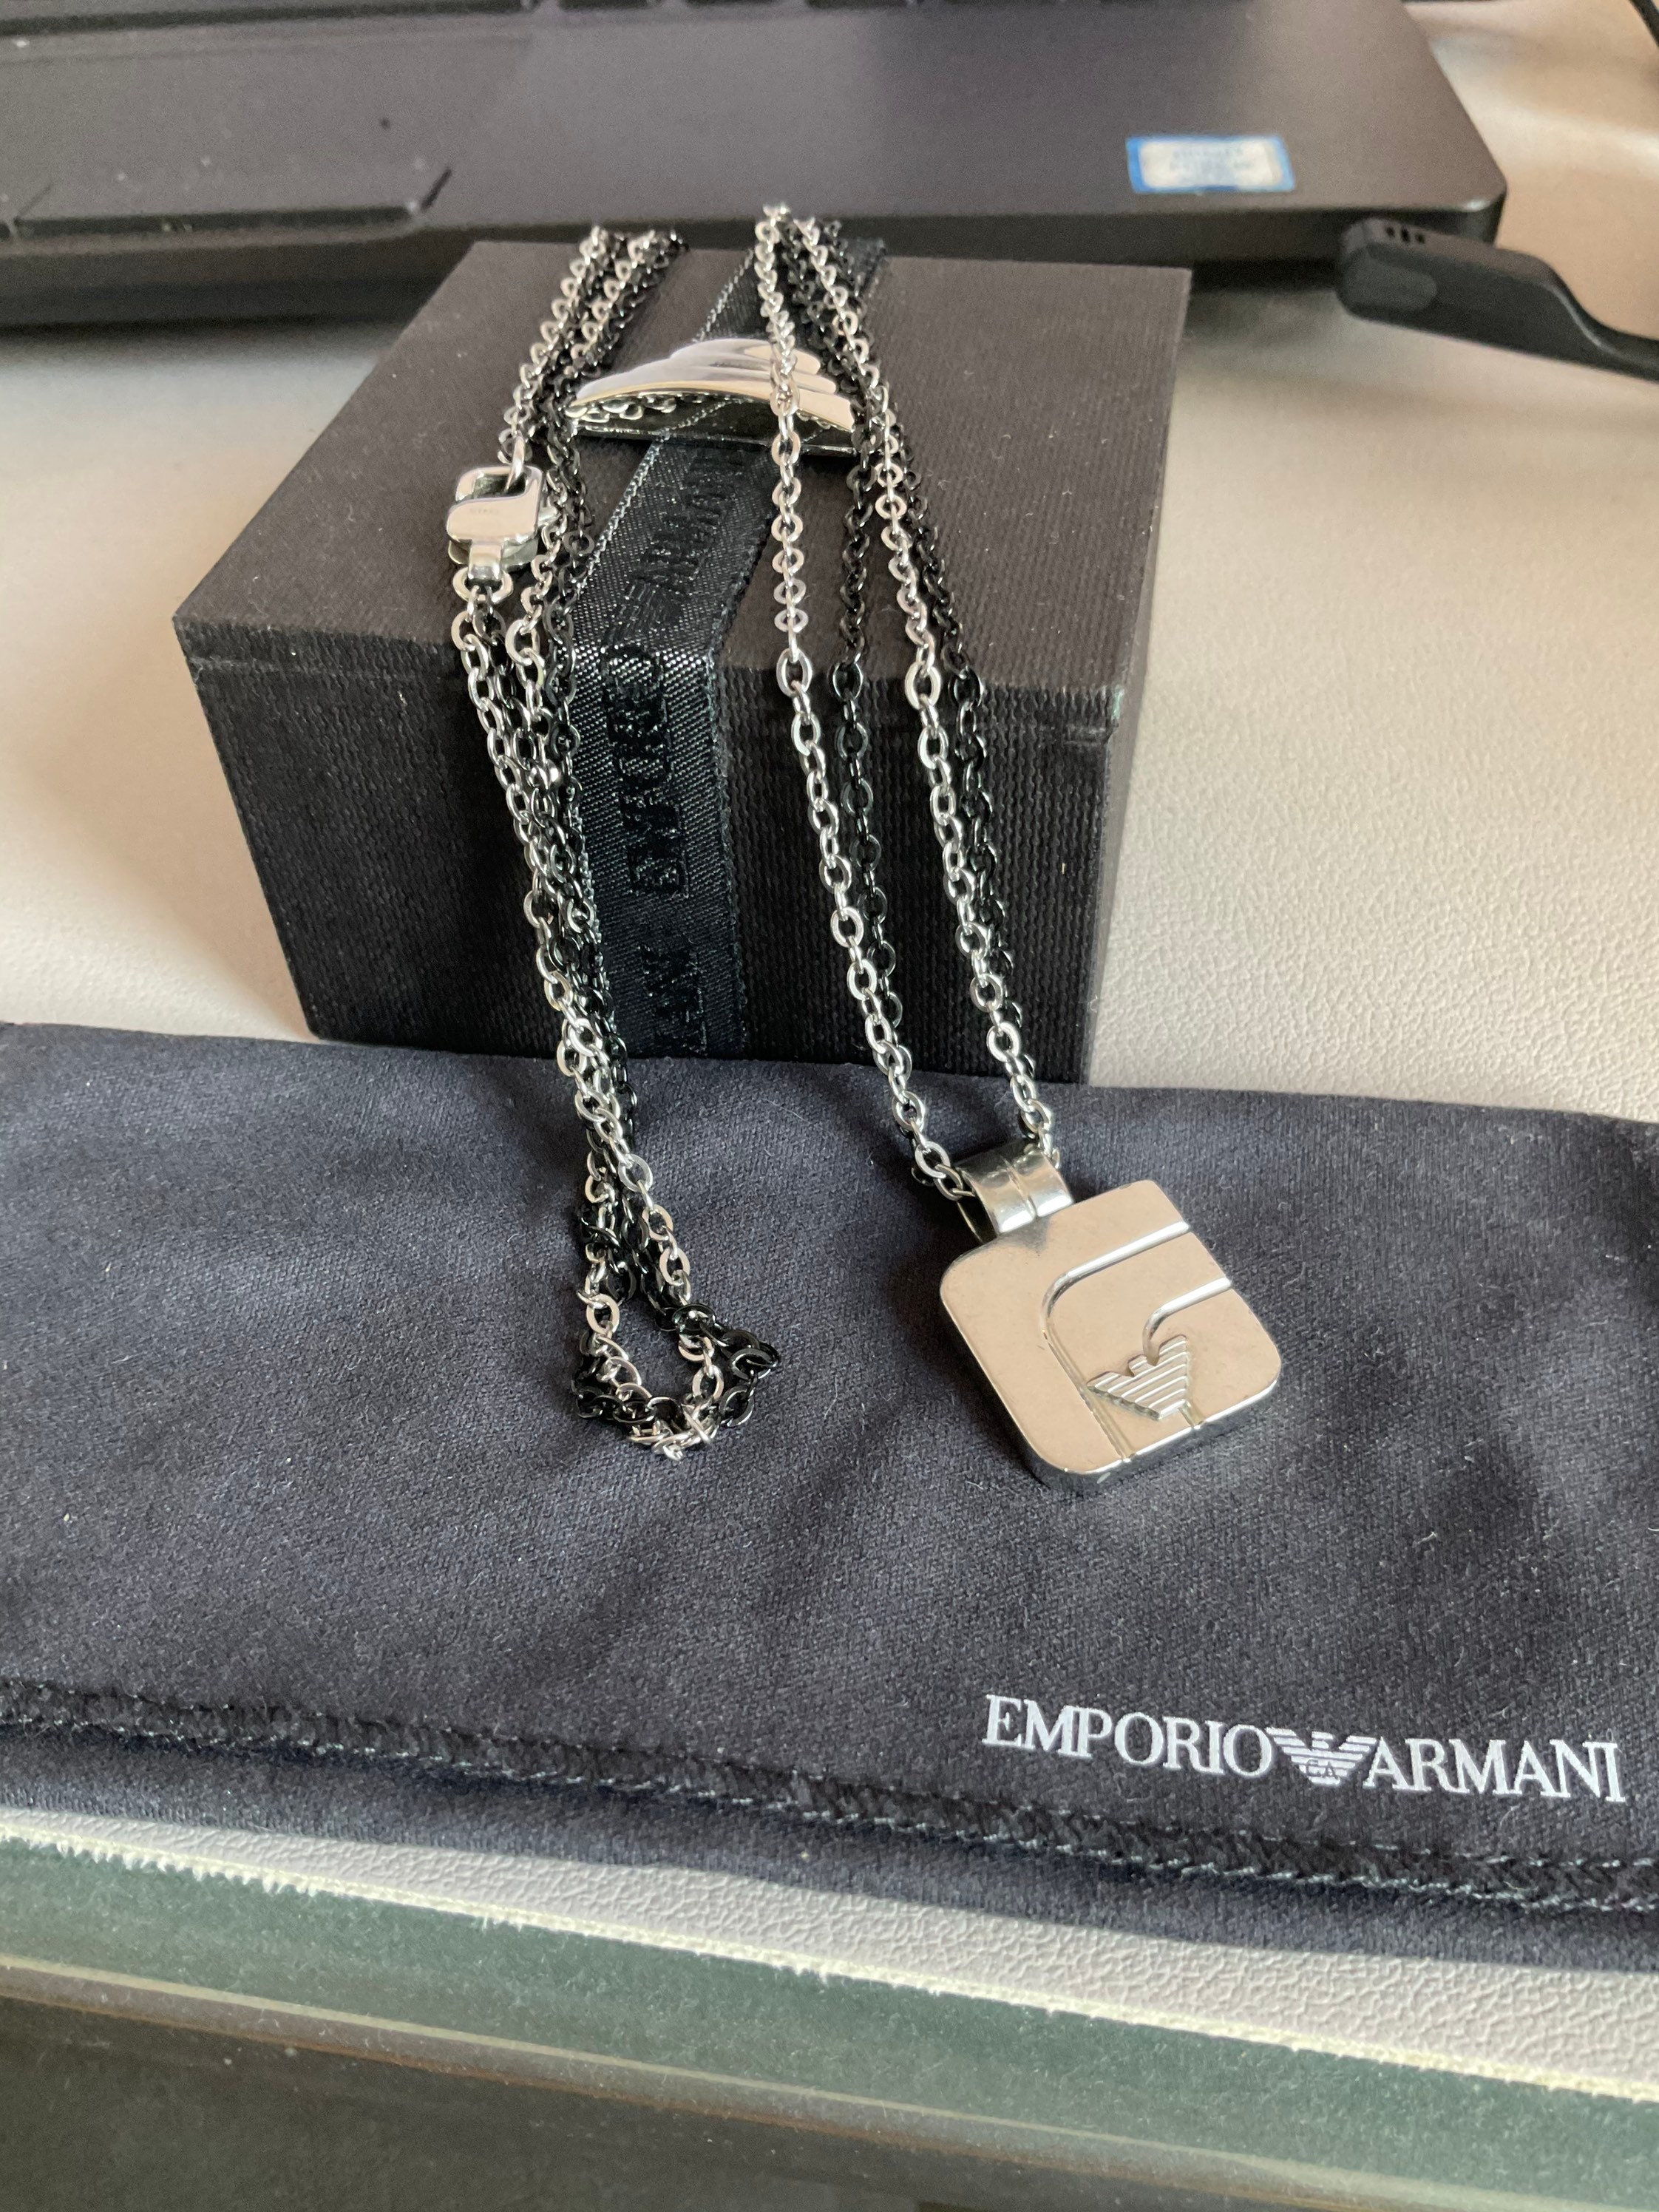 Emporio Armani Necklace for Men , Length: 500mm + 50mm / Size pendant: 25mm  x 35mm x 3.5mm Silver Stainless Steel Necklace, EGS1705040 : Amazon.co.uk:  Fashion